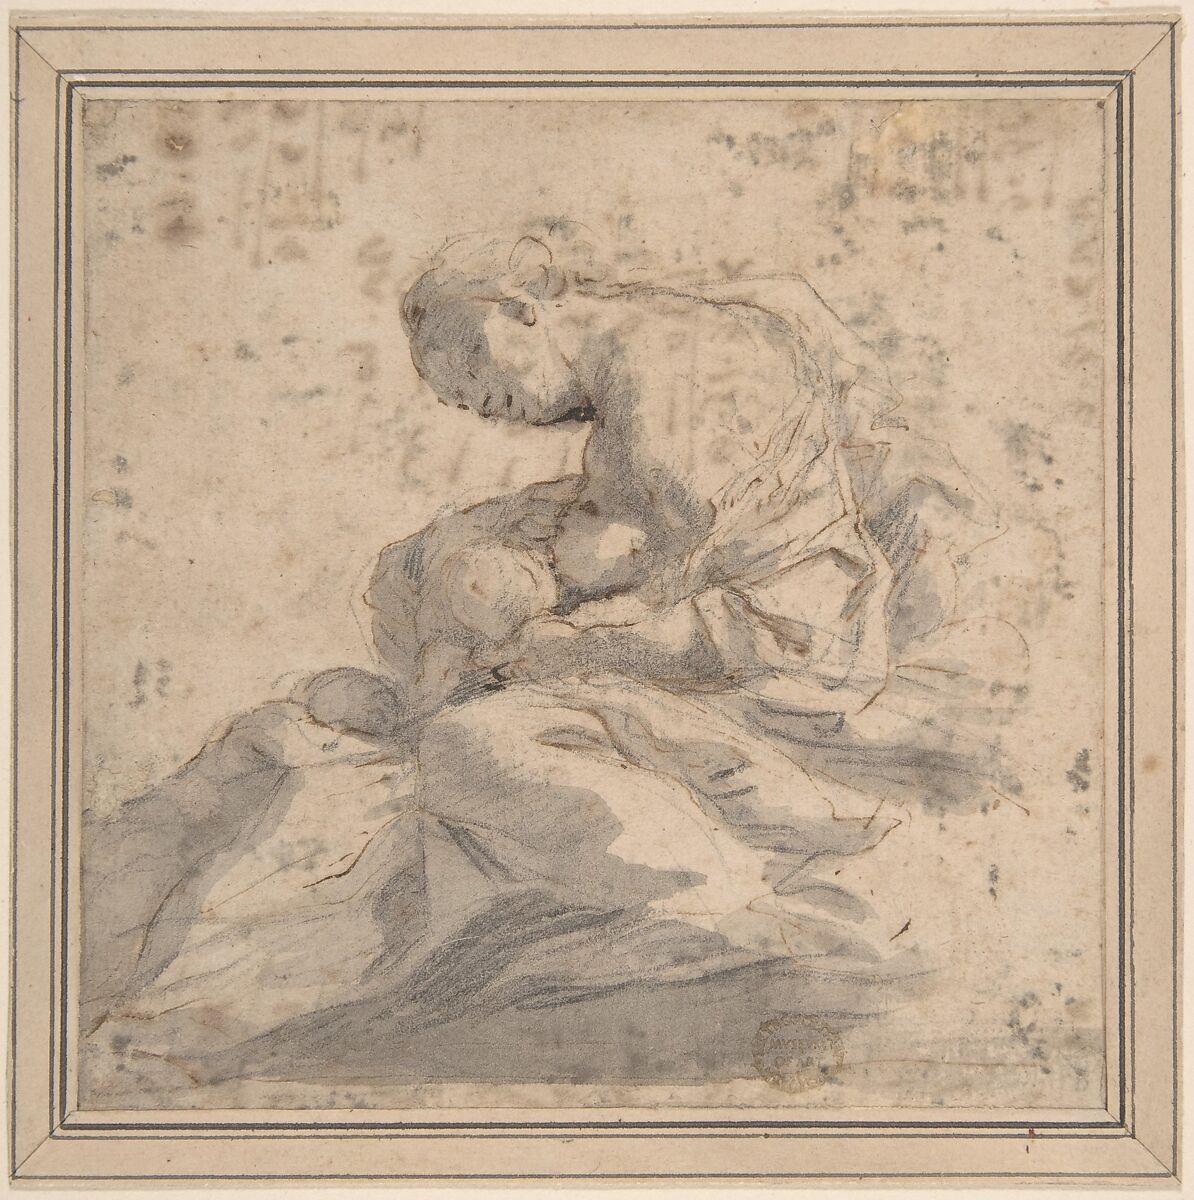 Mother and Children (Charity?), Anonymous, Italian, Roman-Bolognese, 17th century, Pen and brown ink, brush and gray wash, over black chalk on light tan paper 